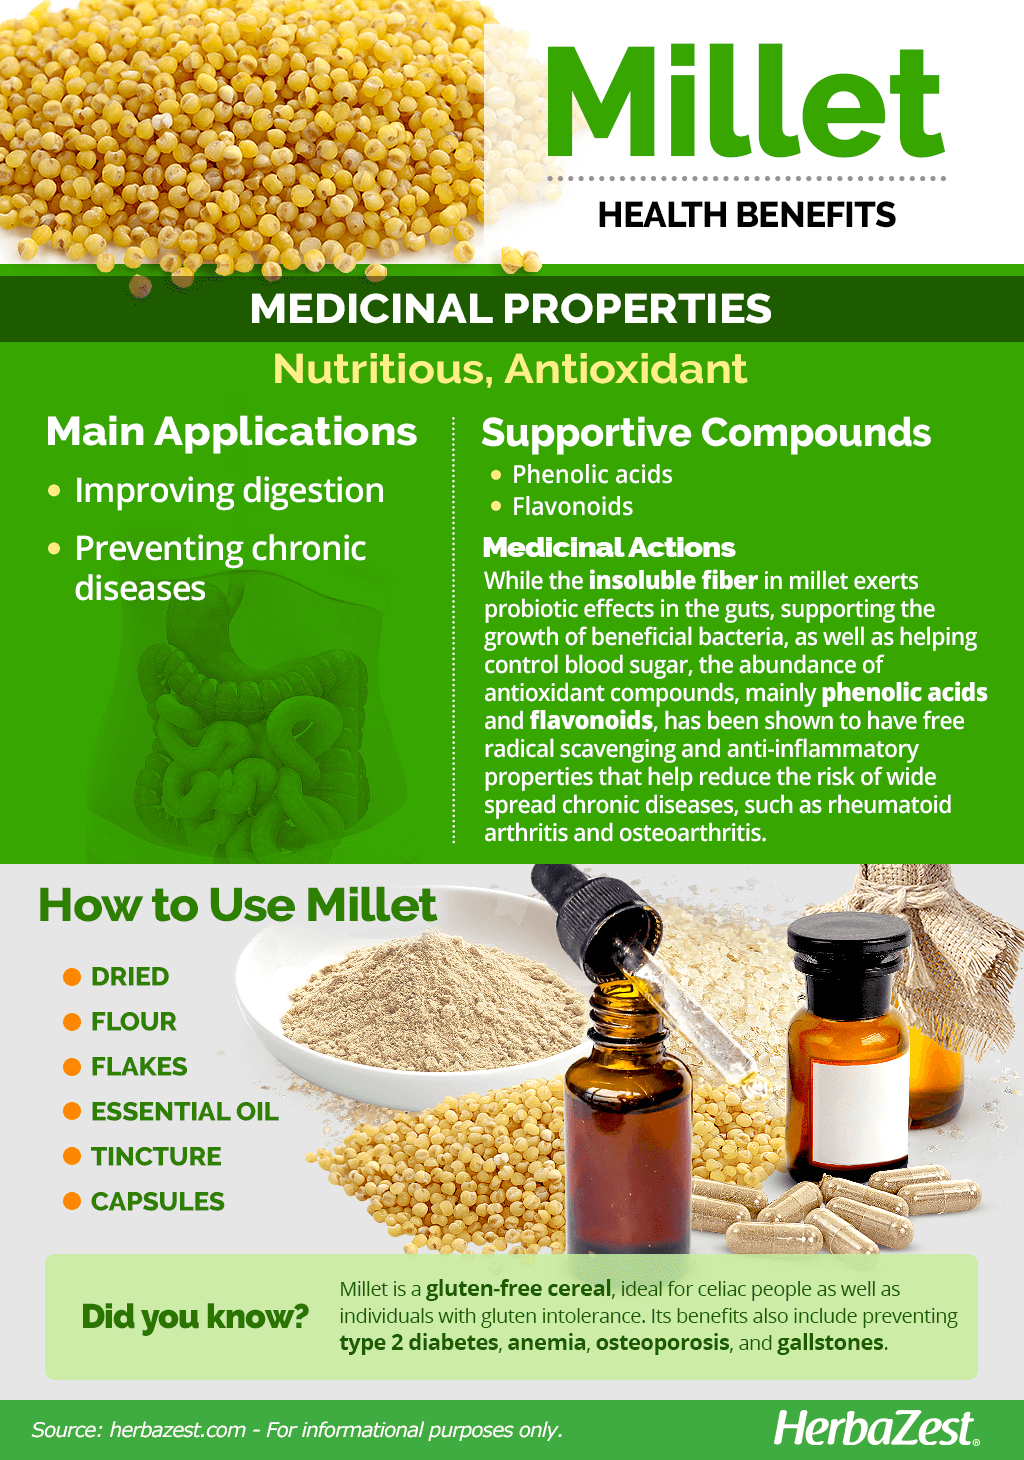 All About Millet